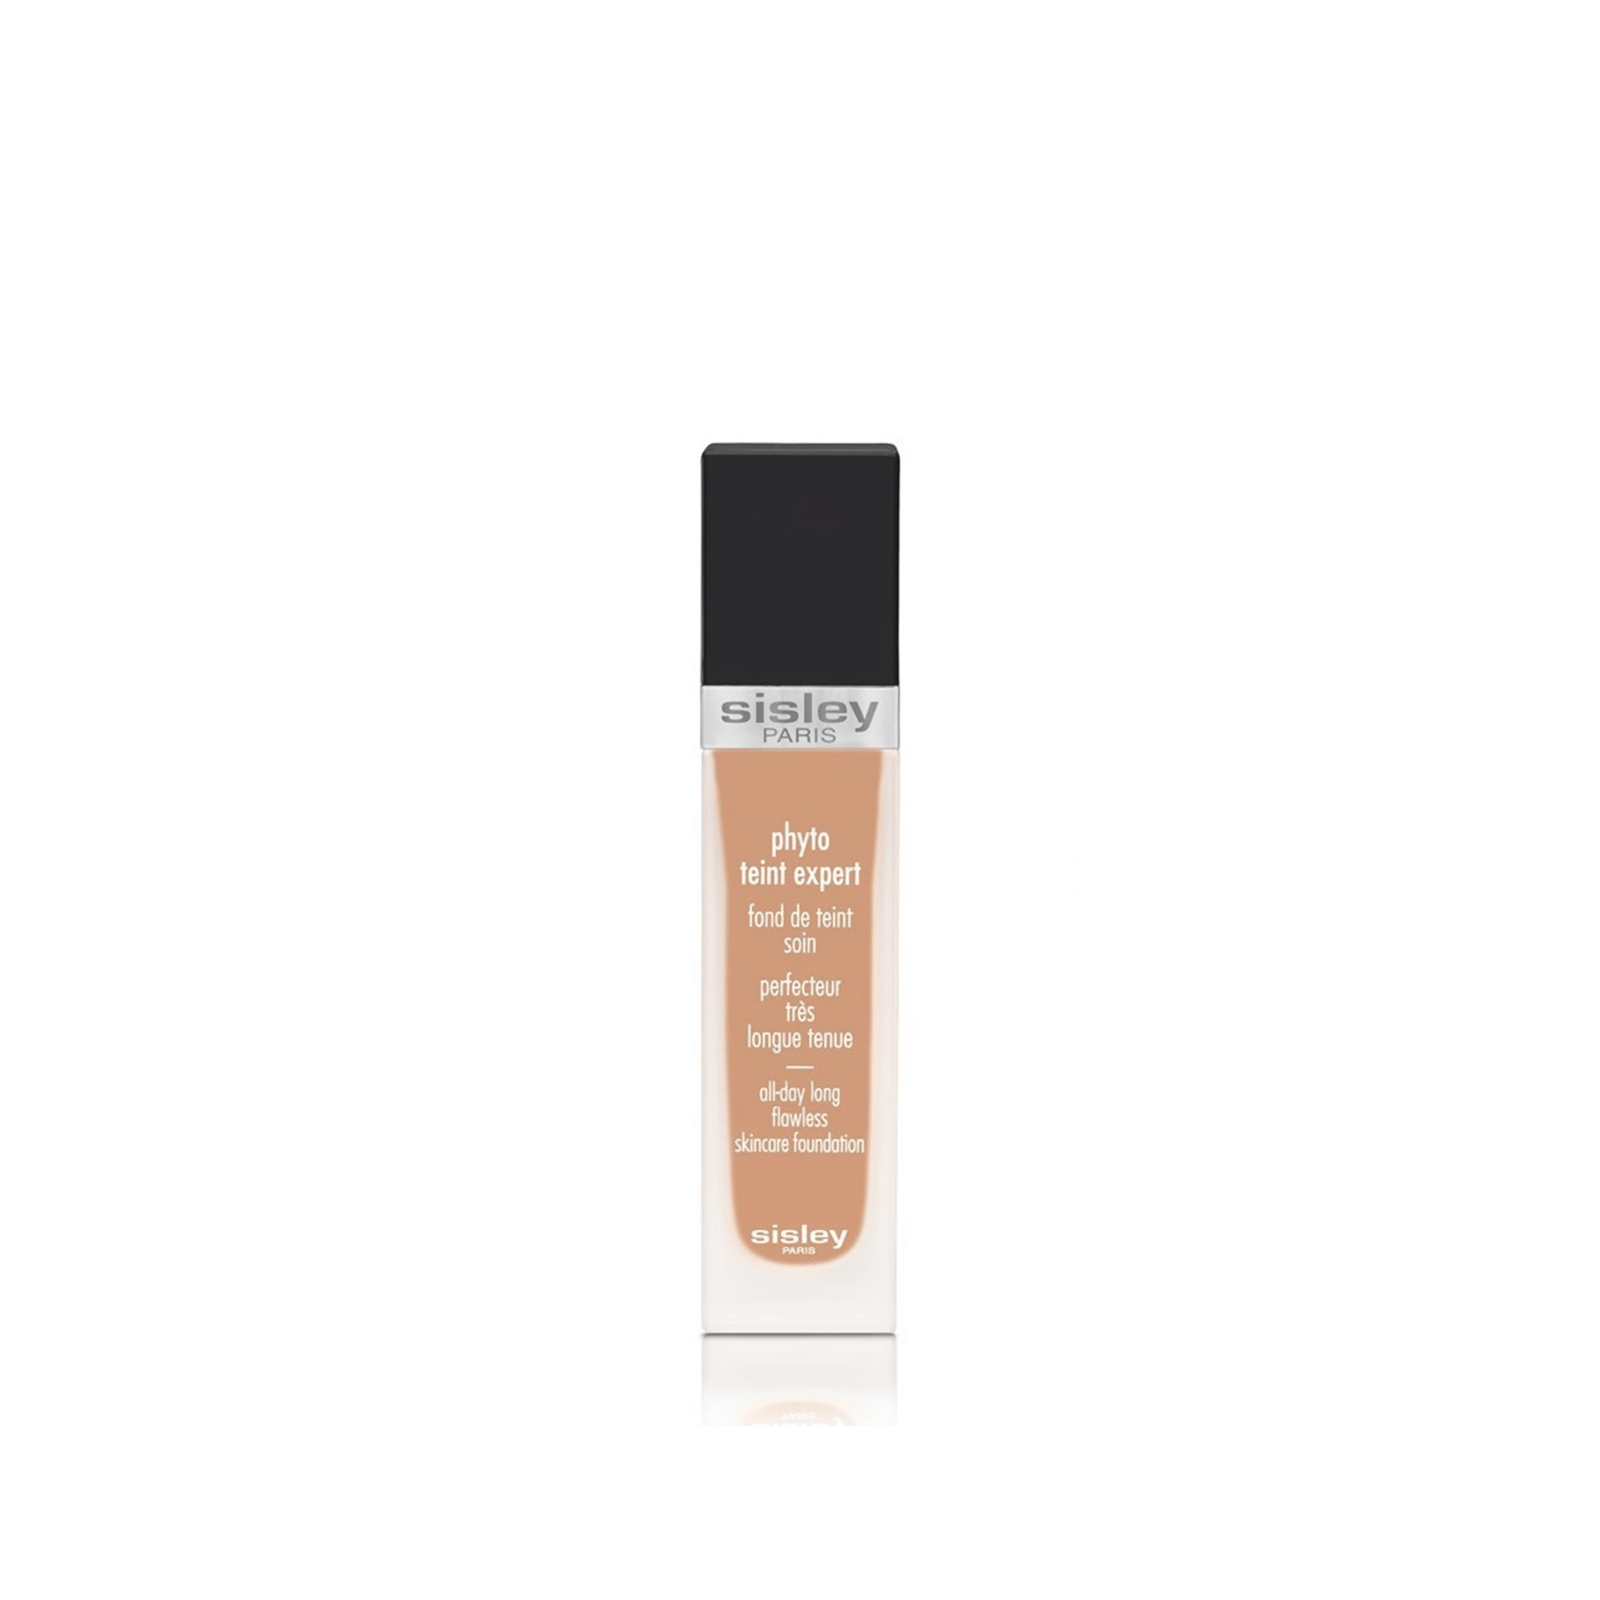 Sisley Paris Phyto Teint Expert All-Day Long Flawless Skincare Foundation 3 Natural 30ml